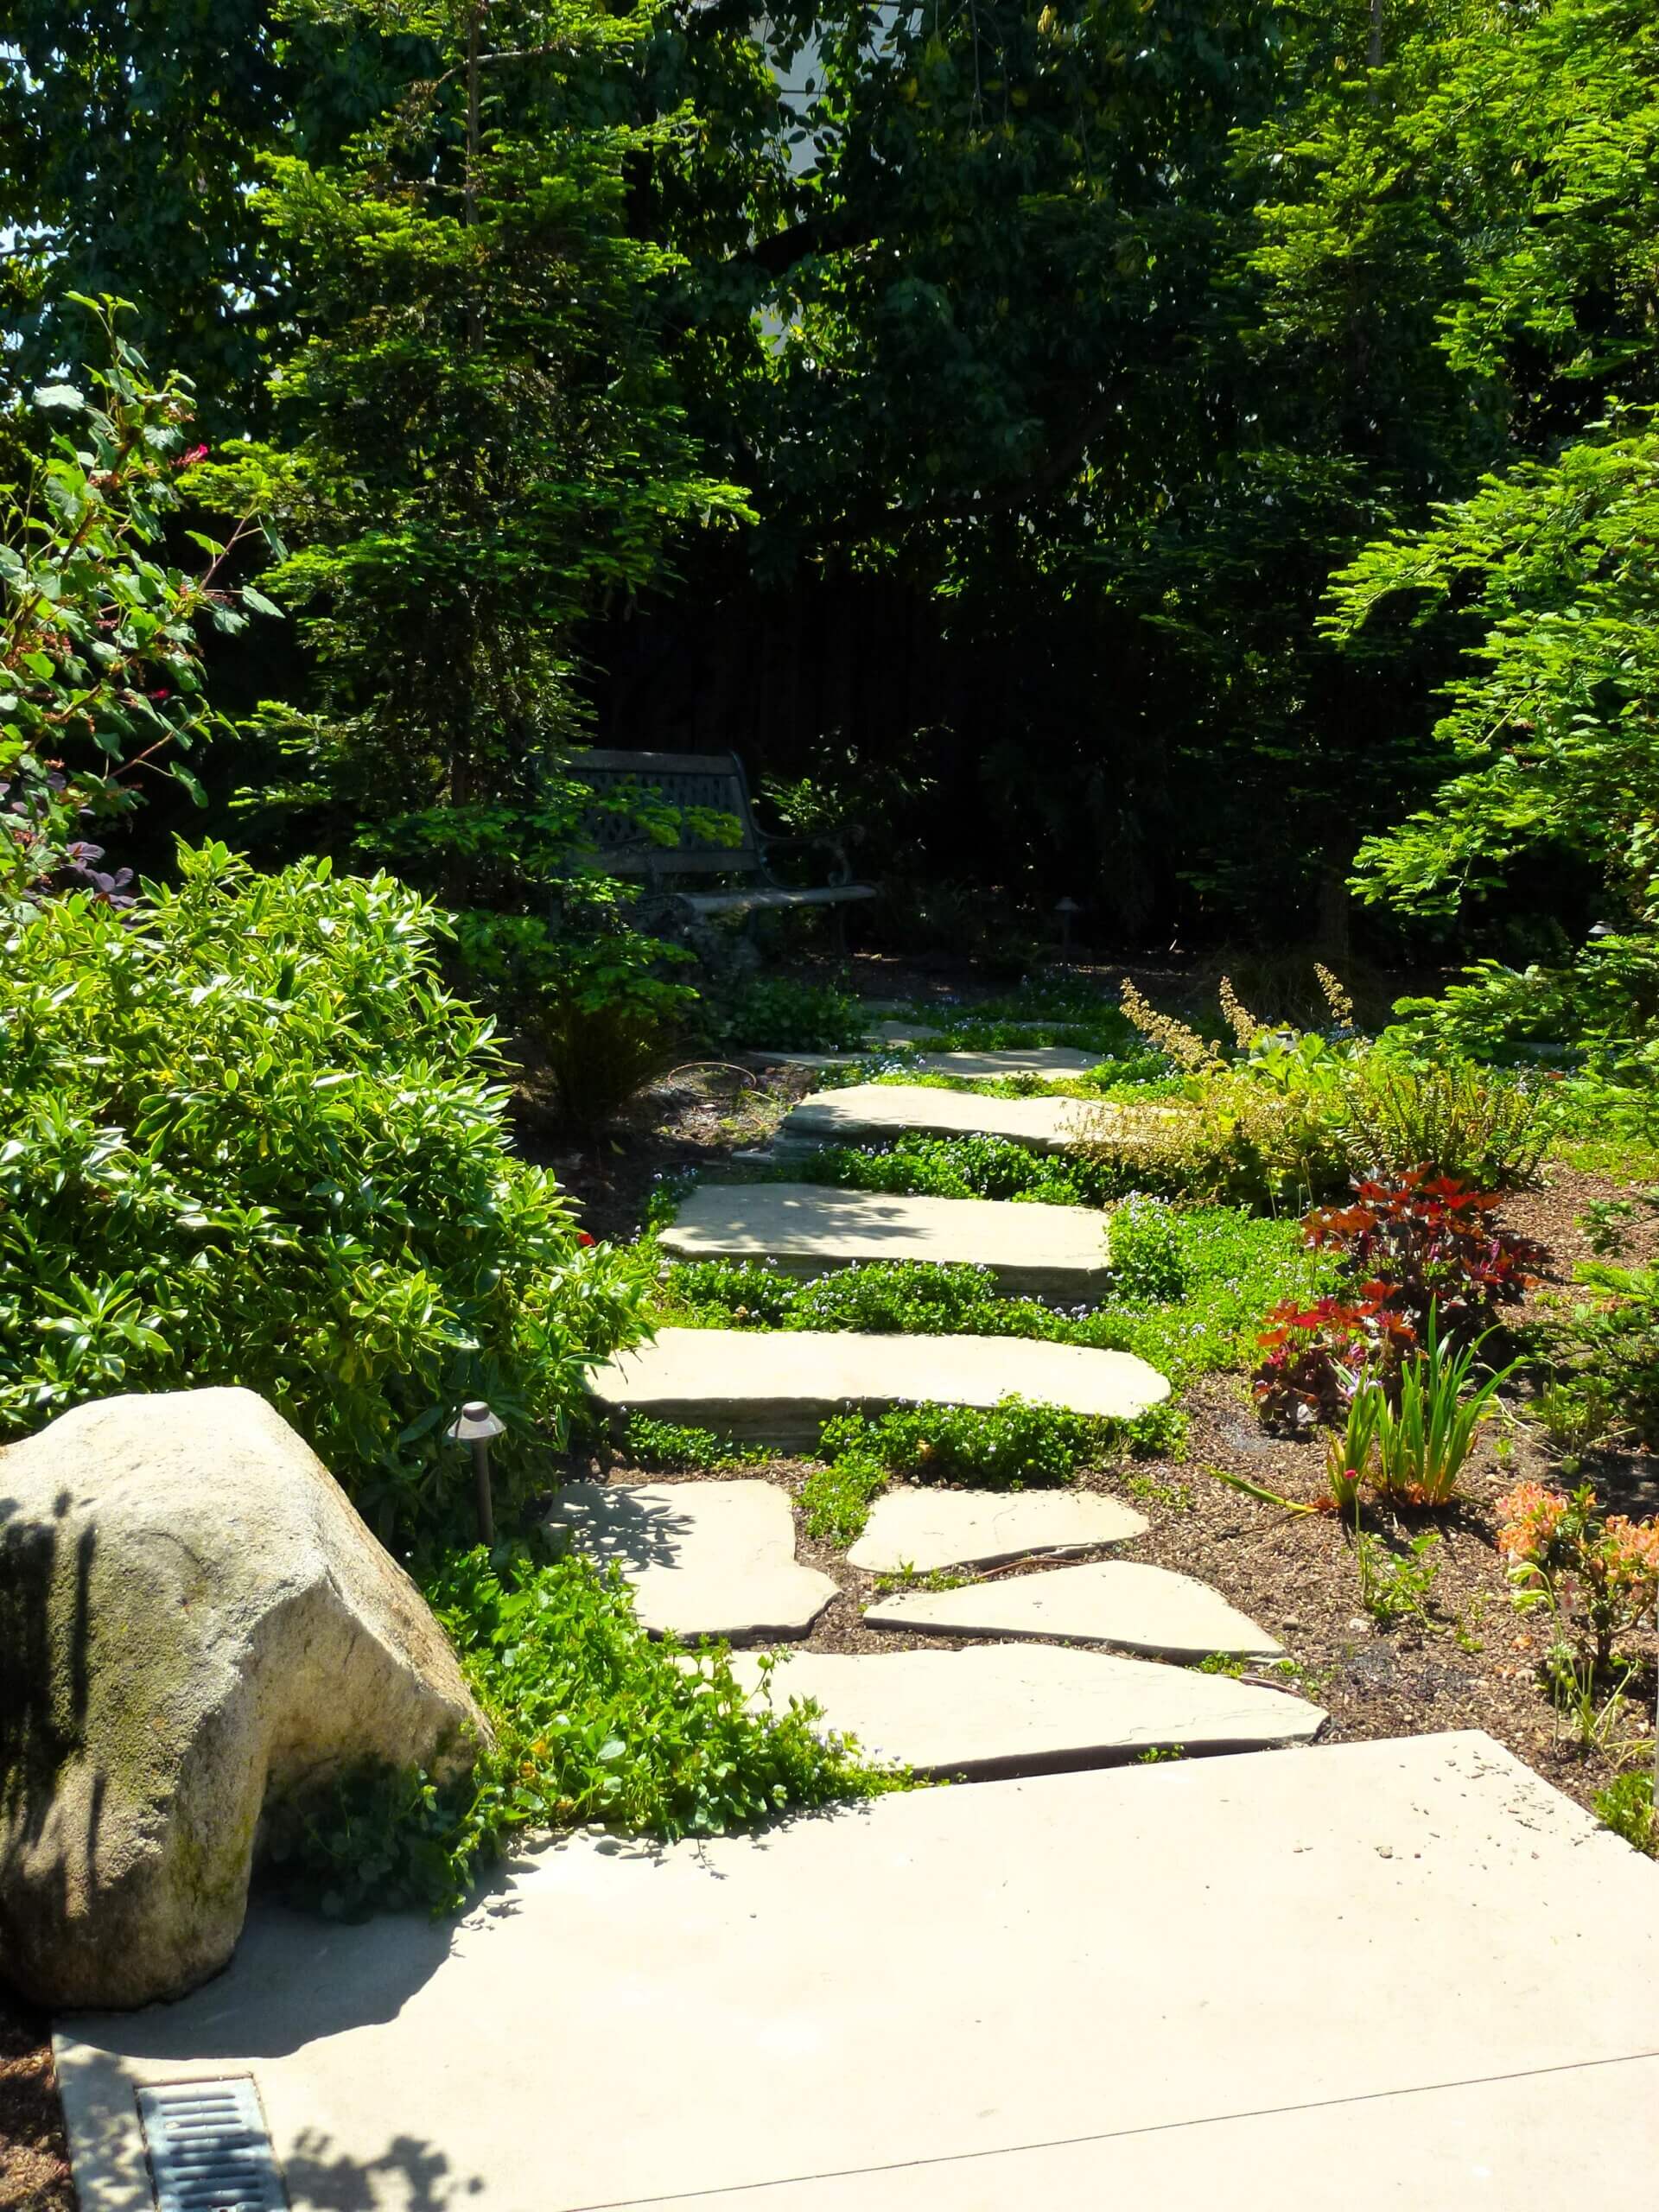 Natural Pathway made from stepping stones leading to hidden seating area in backyard forest